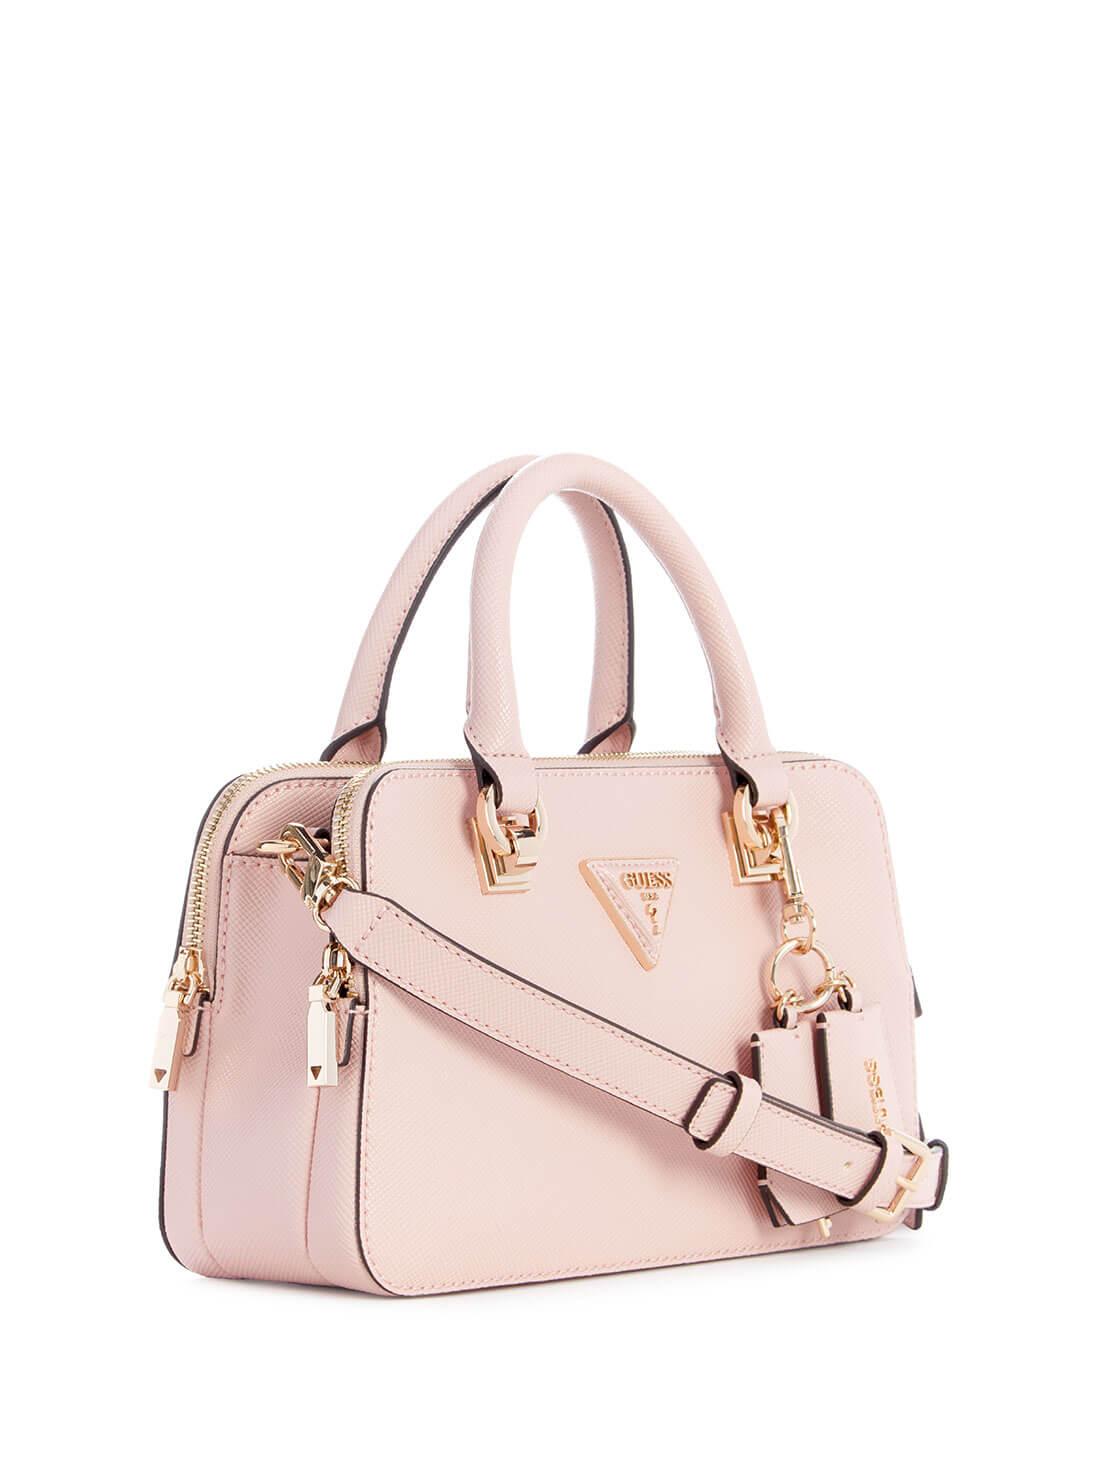 Women's Blush Pink Brynlee Small Status Satchel Bag front view alt